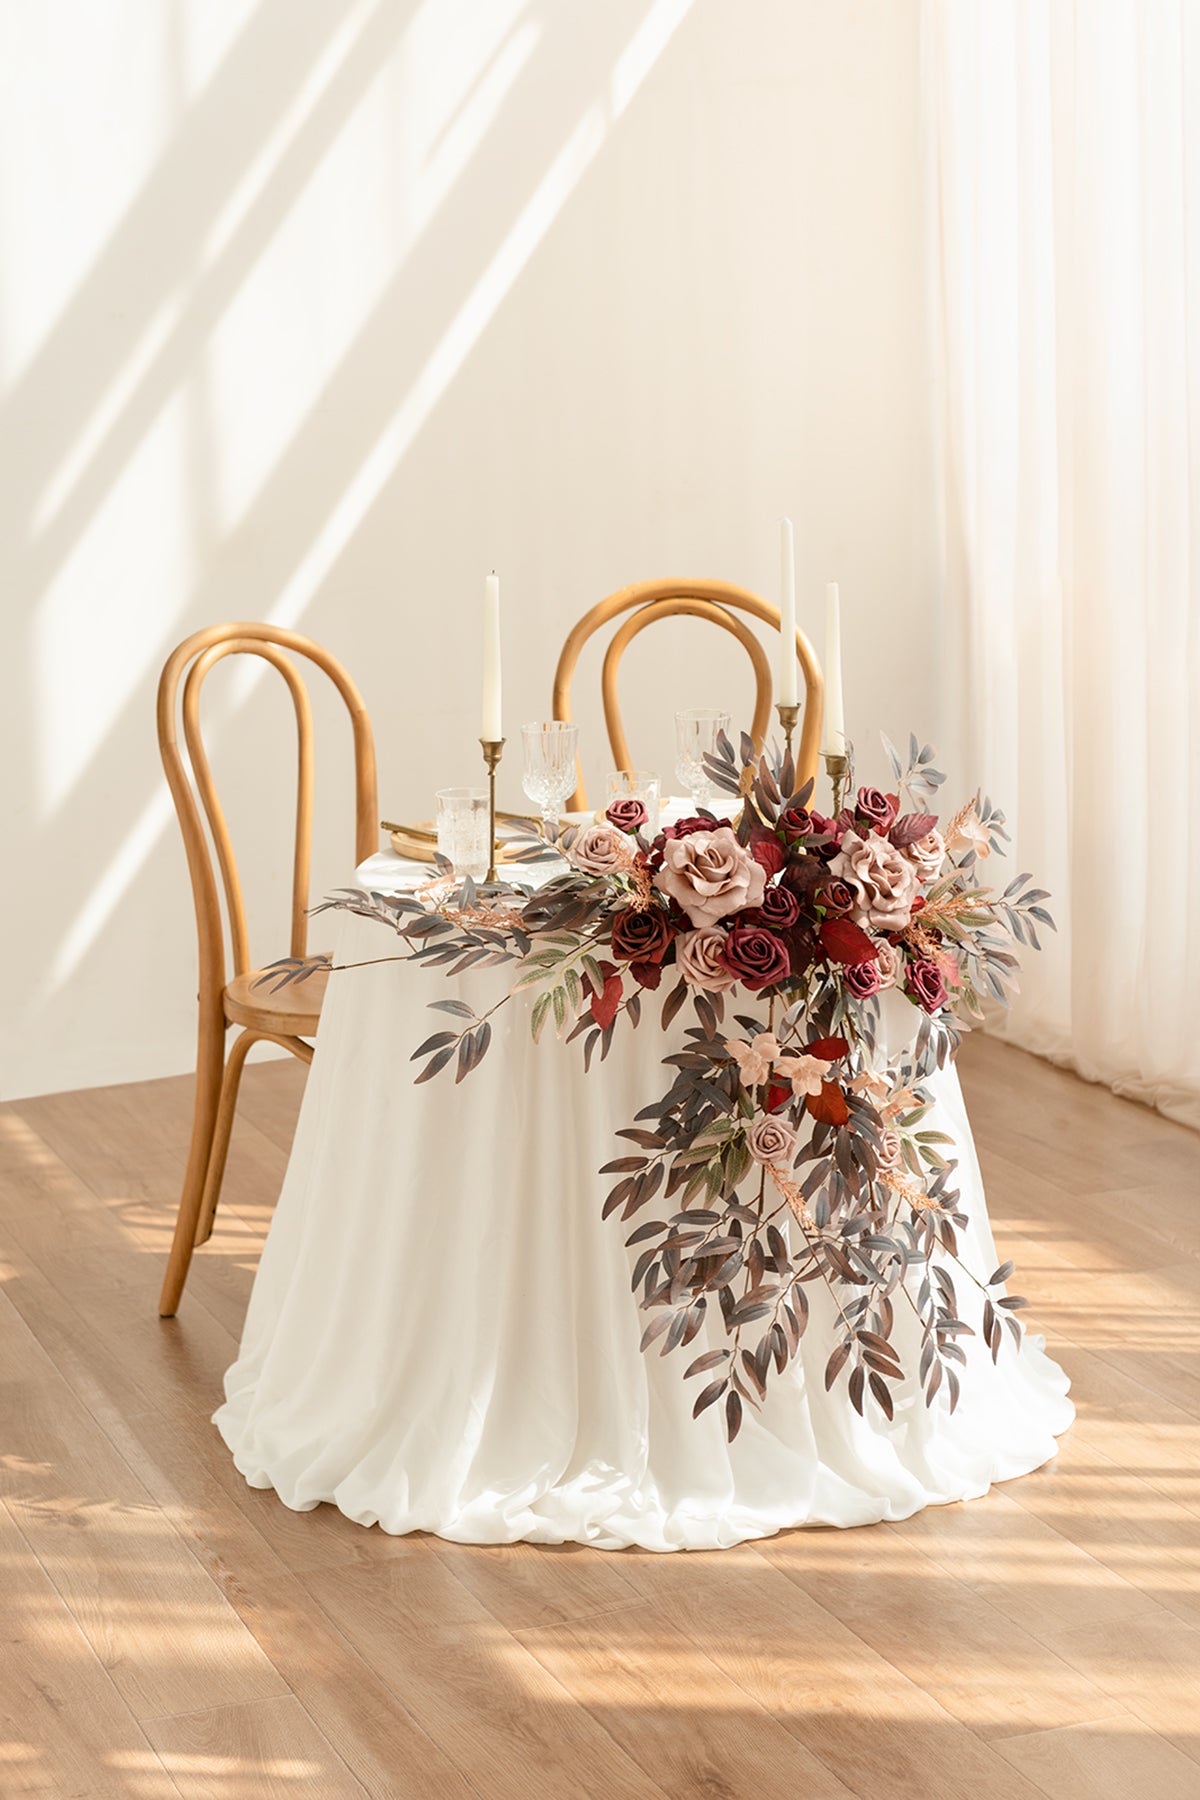 Sweetheart Table Floral Swags in Burgundy & Dusty Rose – Ling's Moment